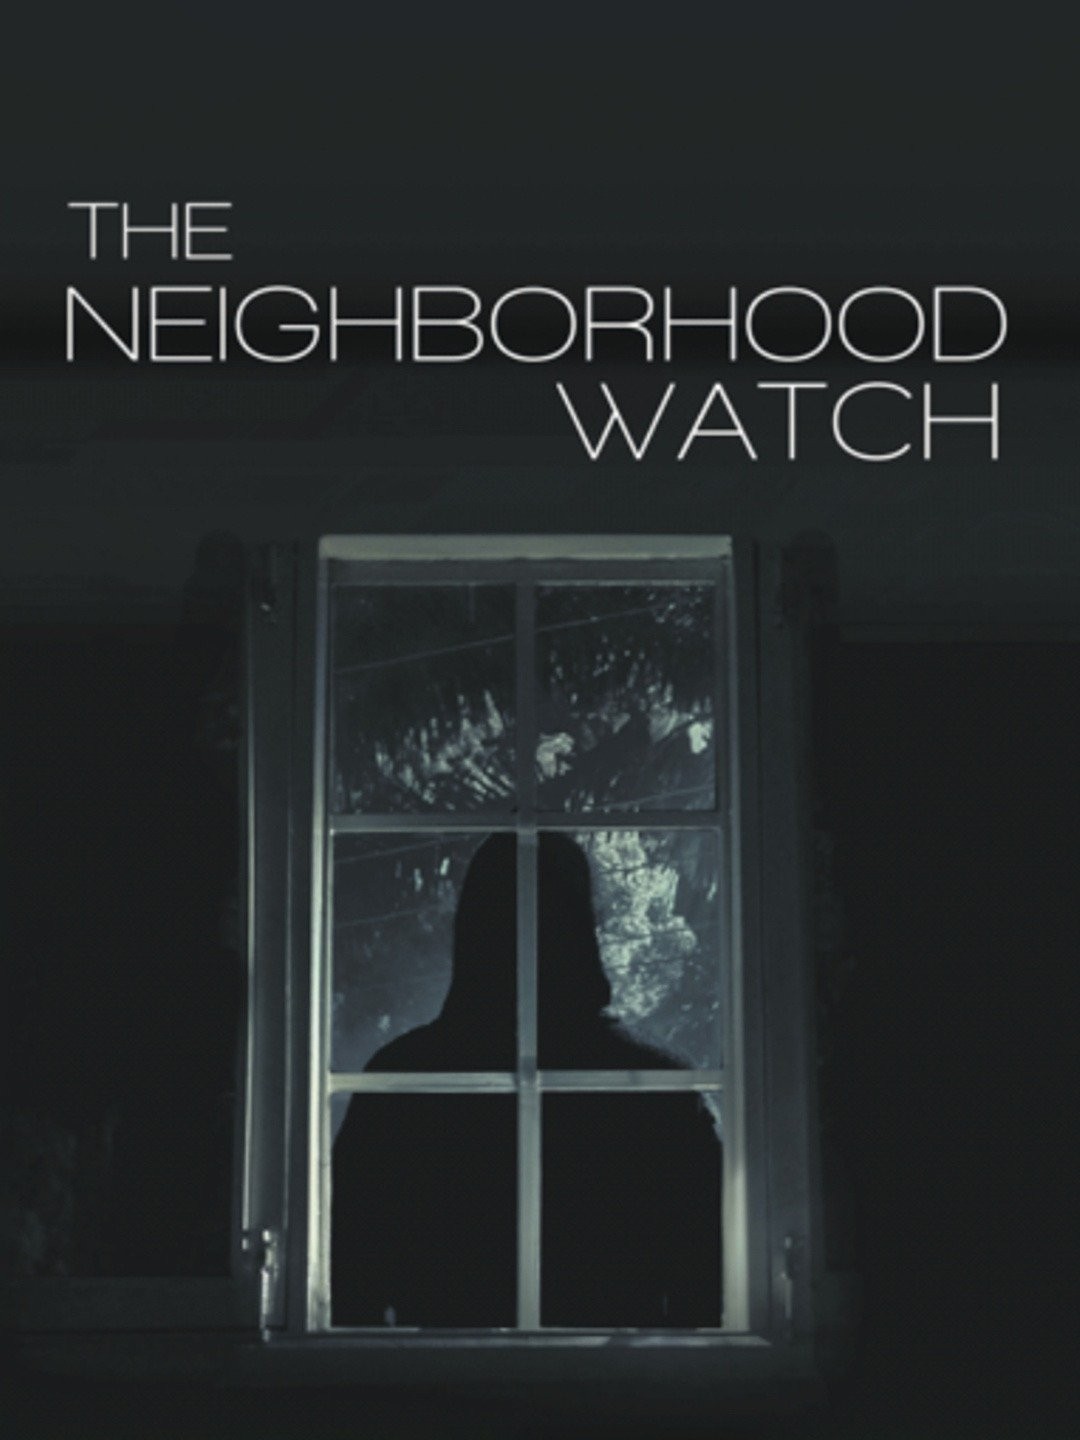 The Neighborhood - Where to Watch and Stream Online –